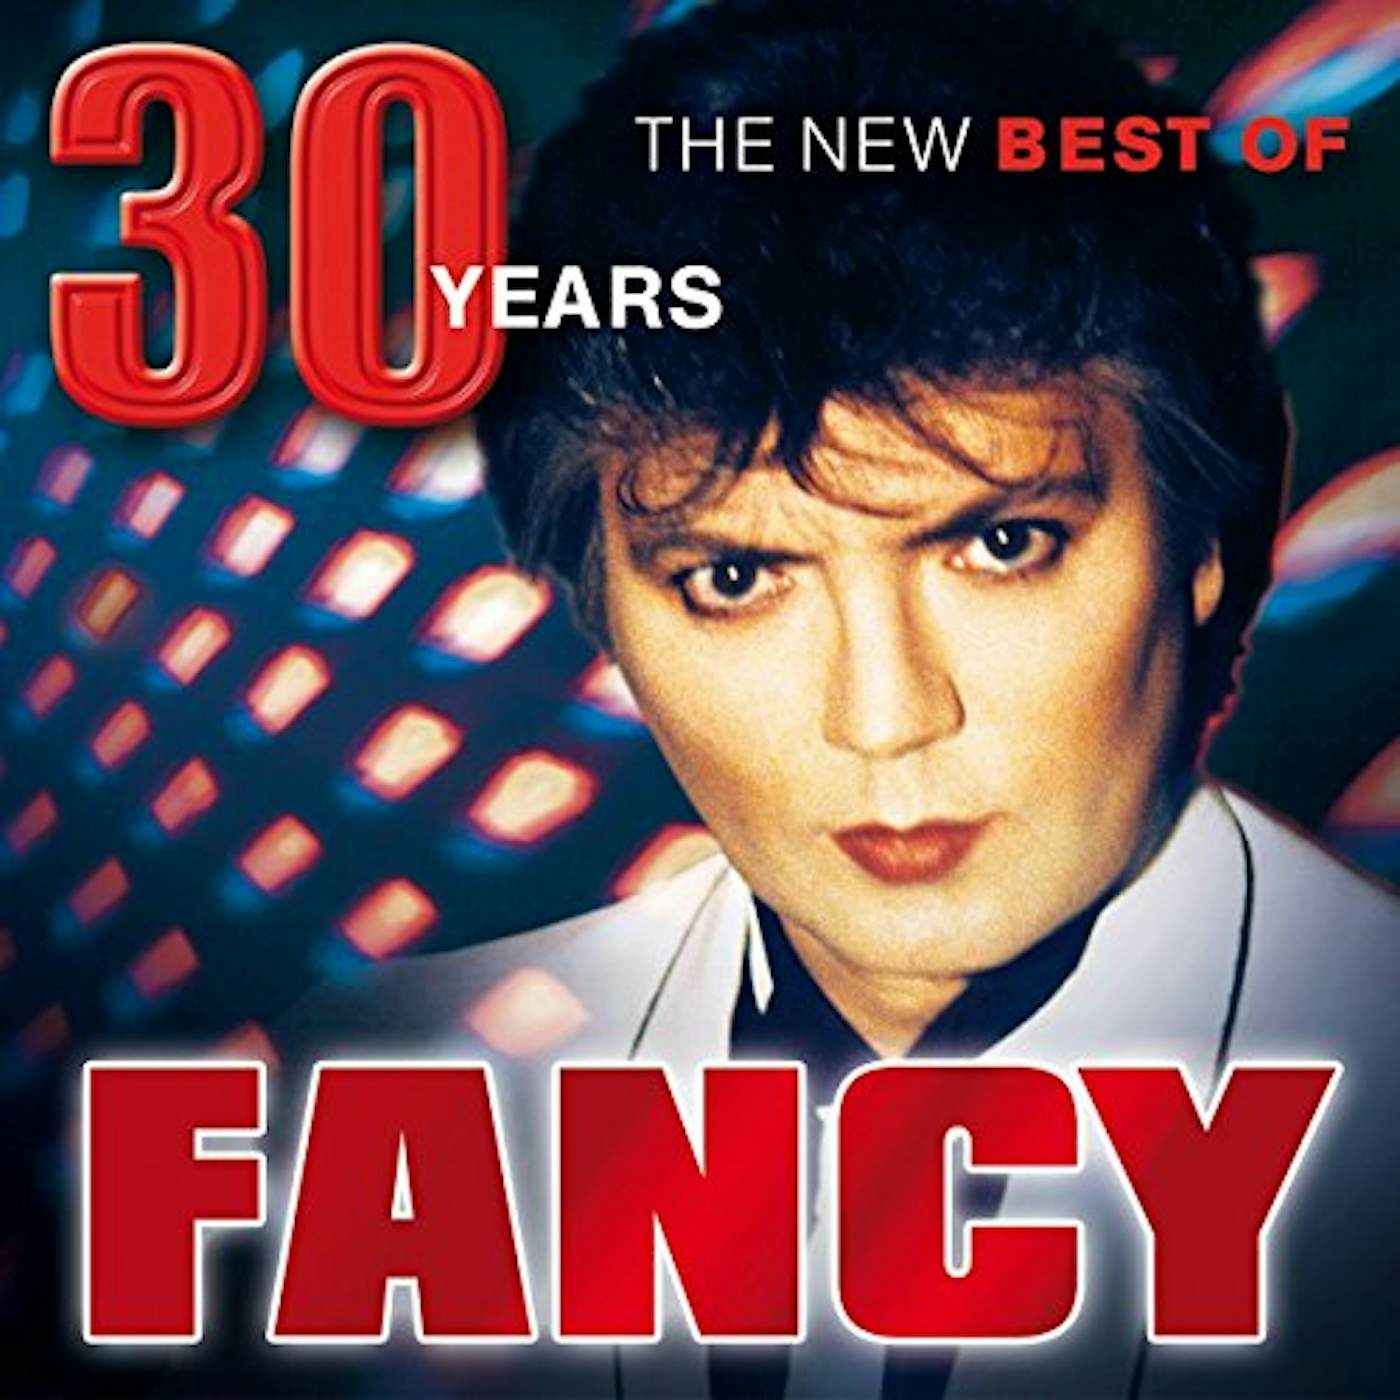 Fancy 30 YEARS: THE NEW BEST OF CD